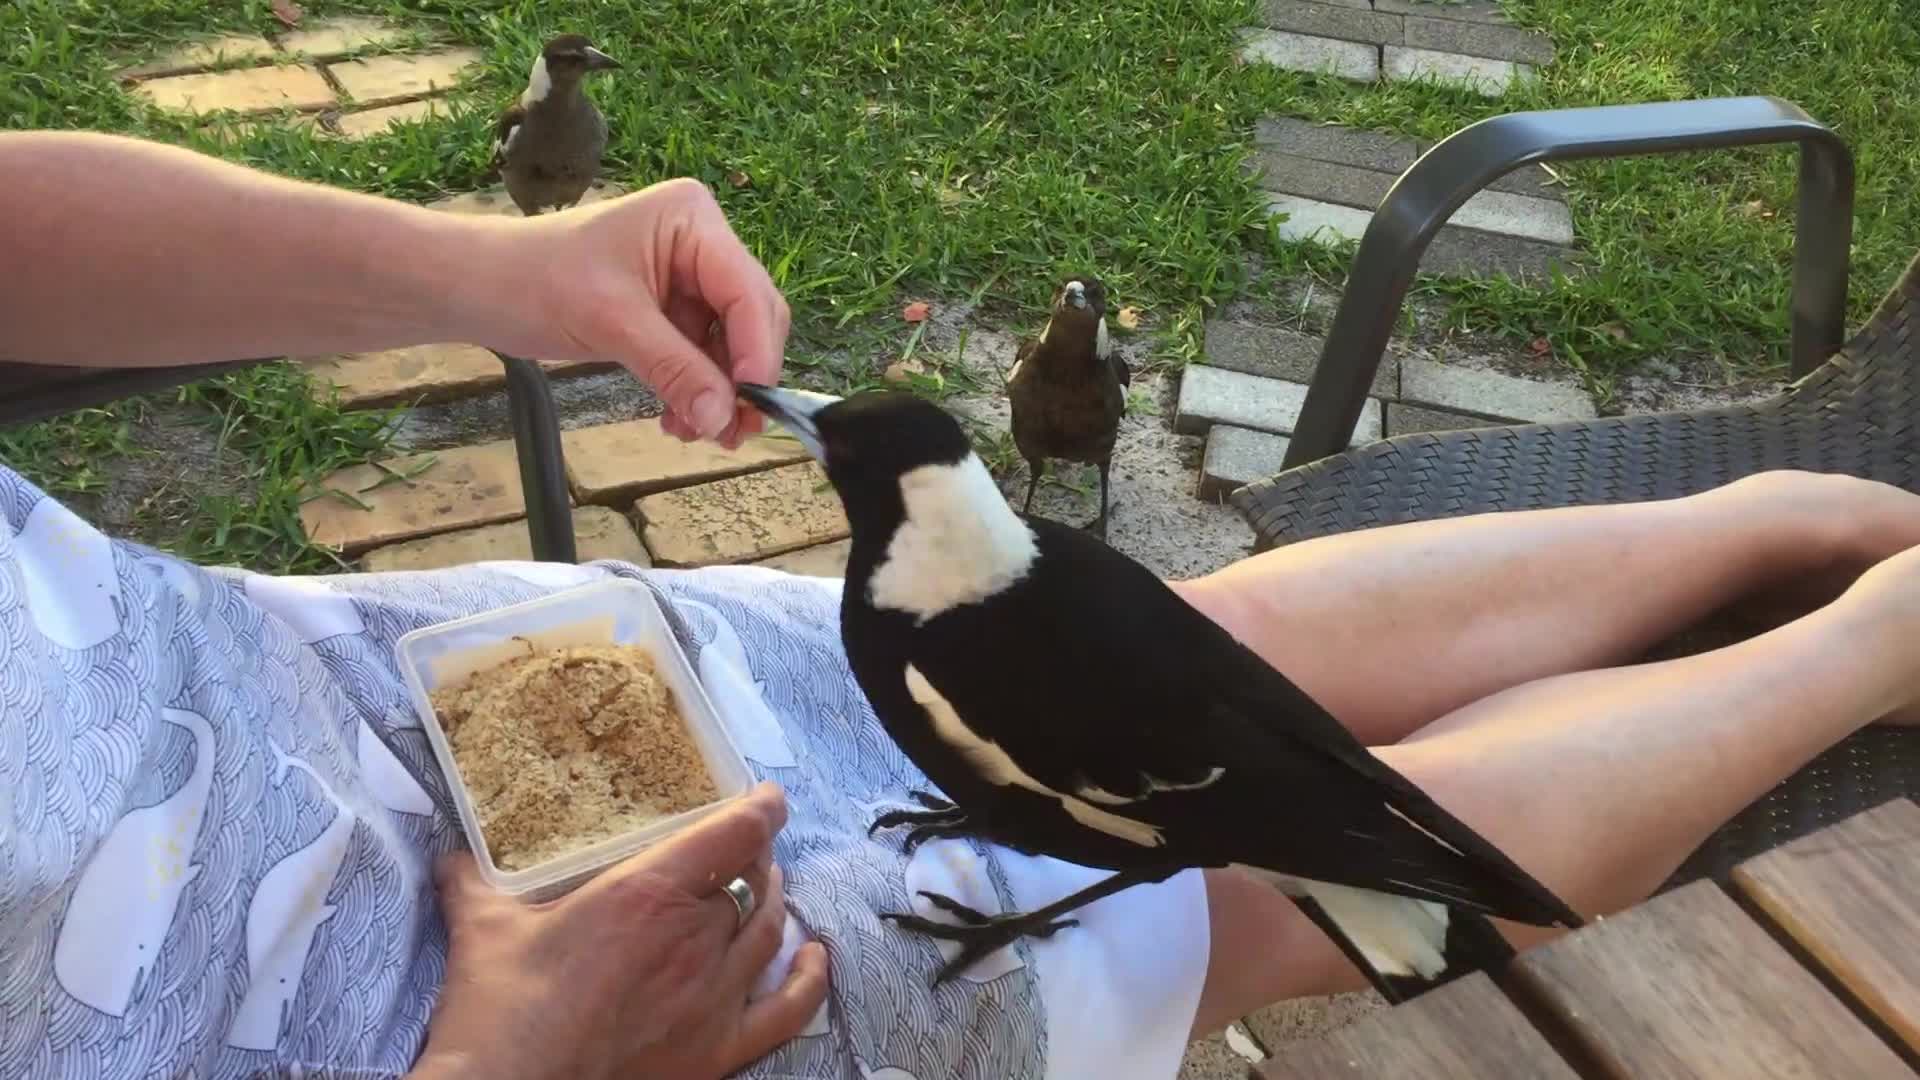 Hungry Magpies Surround Woman While She Feeds Them